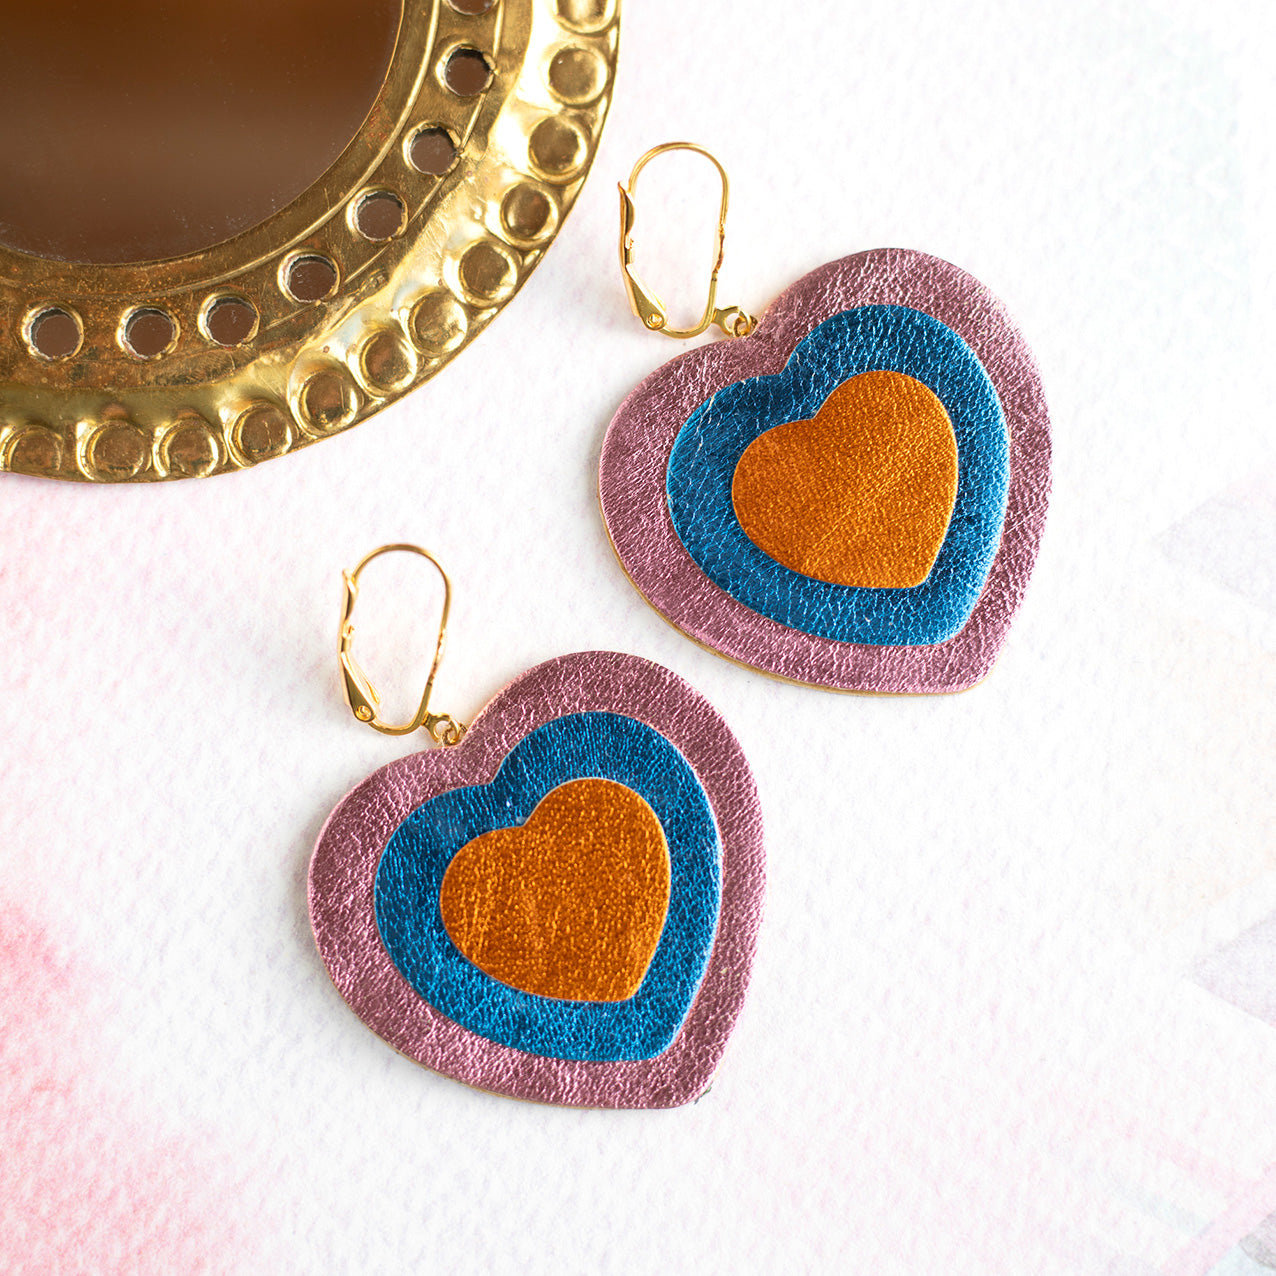 Double Hearts earrings - pink, blue and metallic orange leather